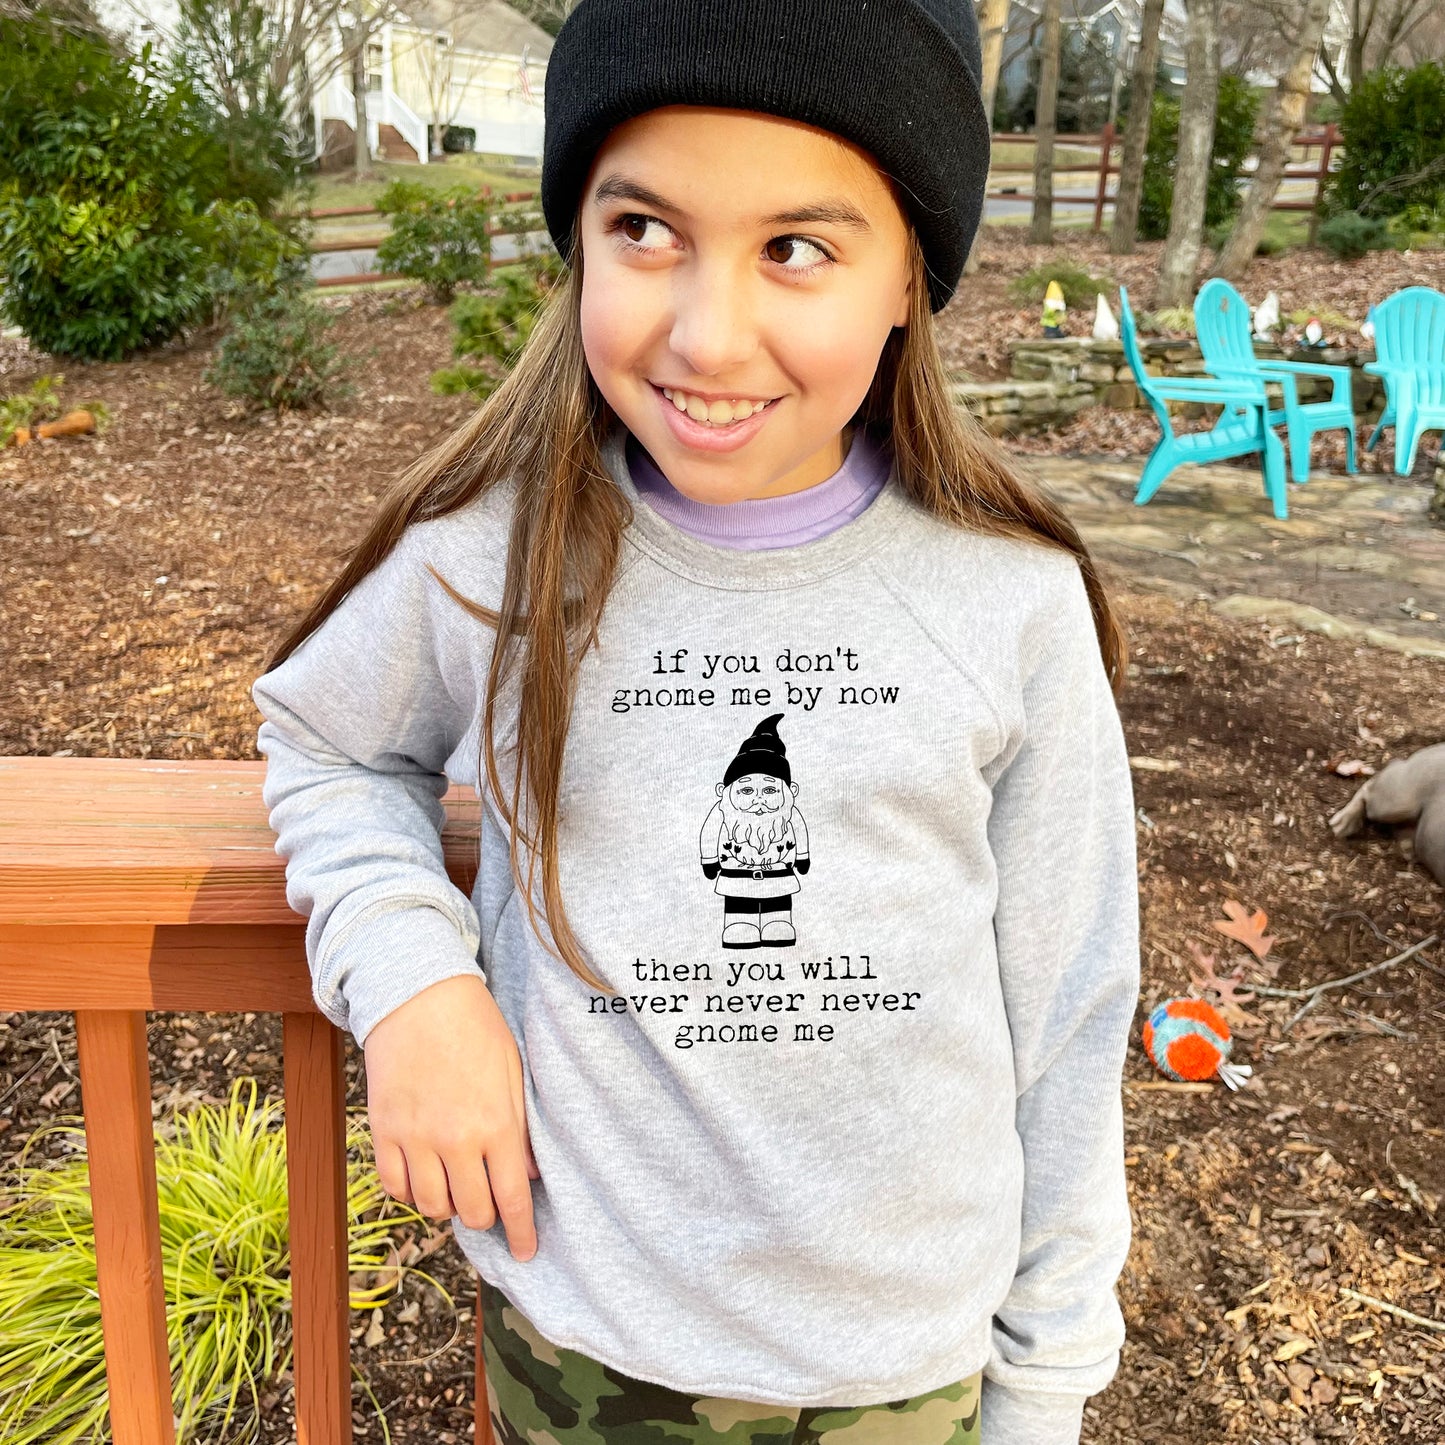 If You Don't Gnome Me By Now - Kid's Sweatshirt - Heather Gray or Mauve